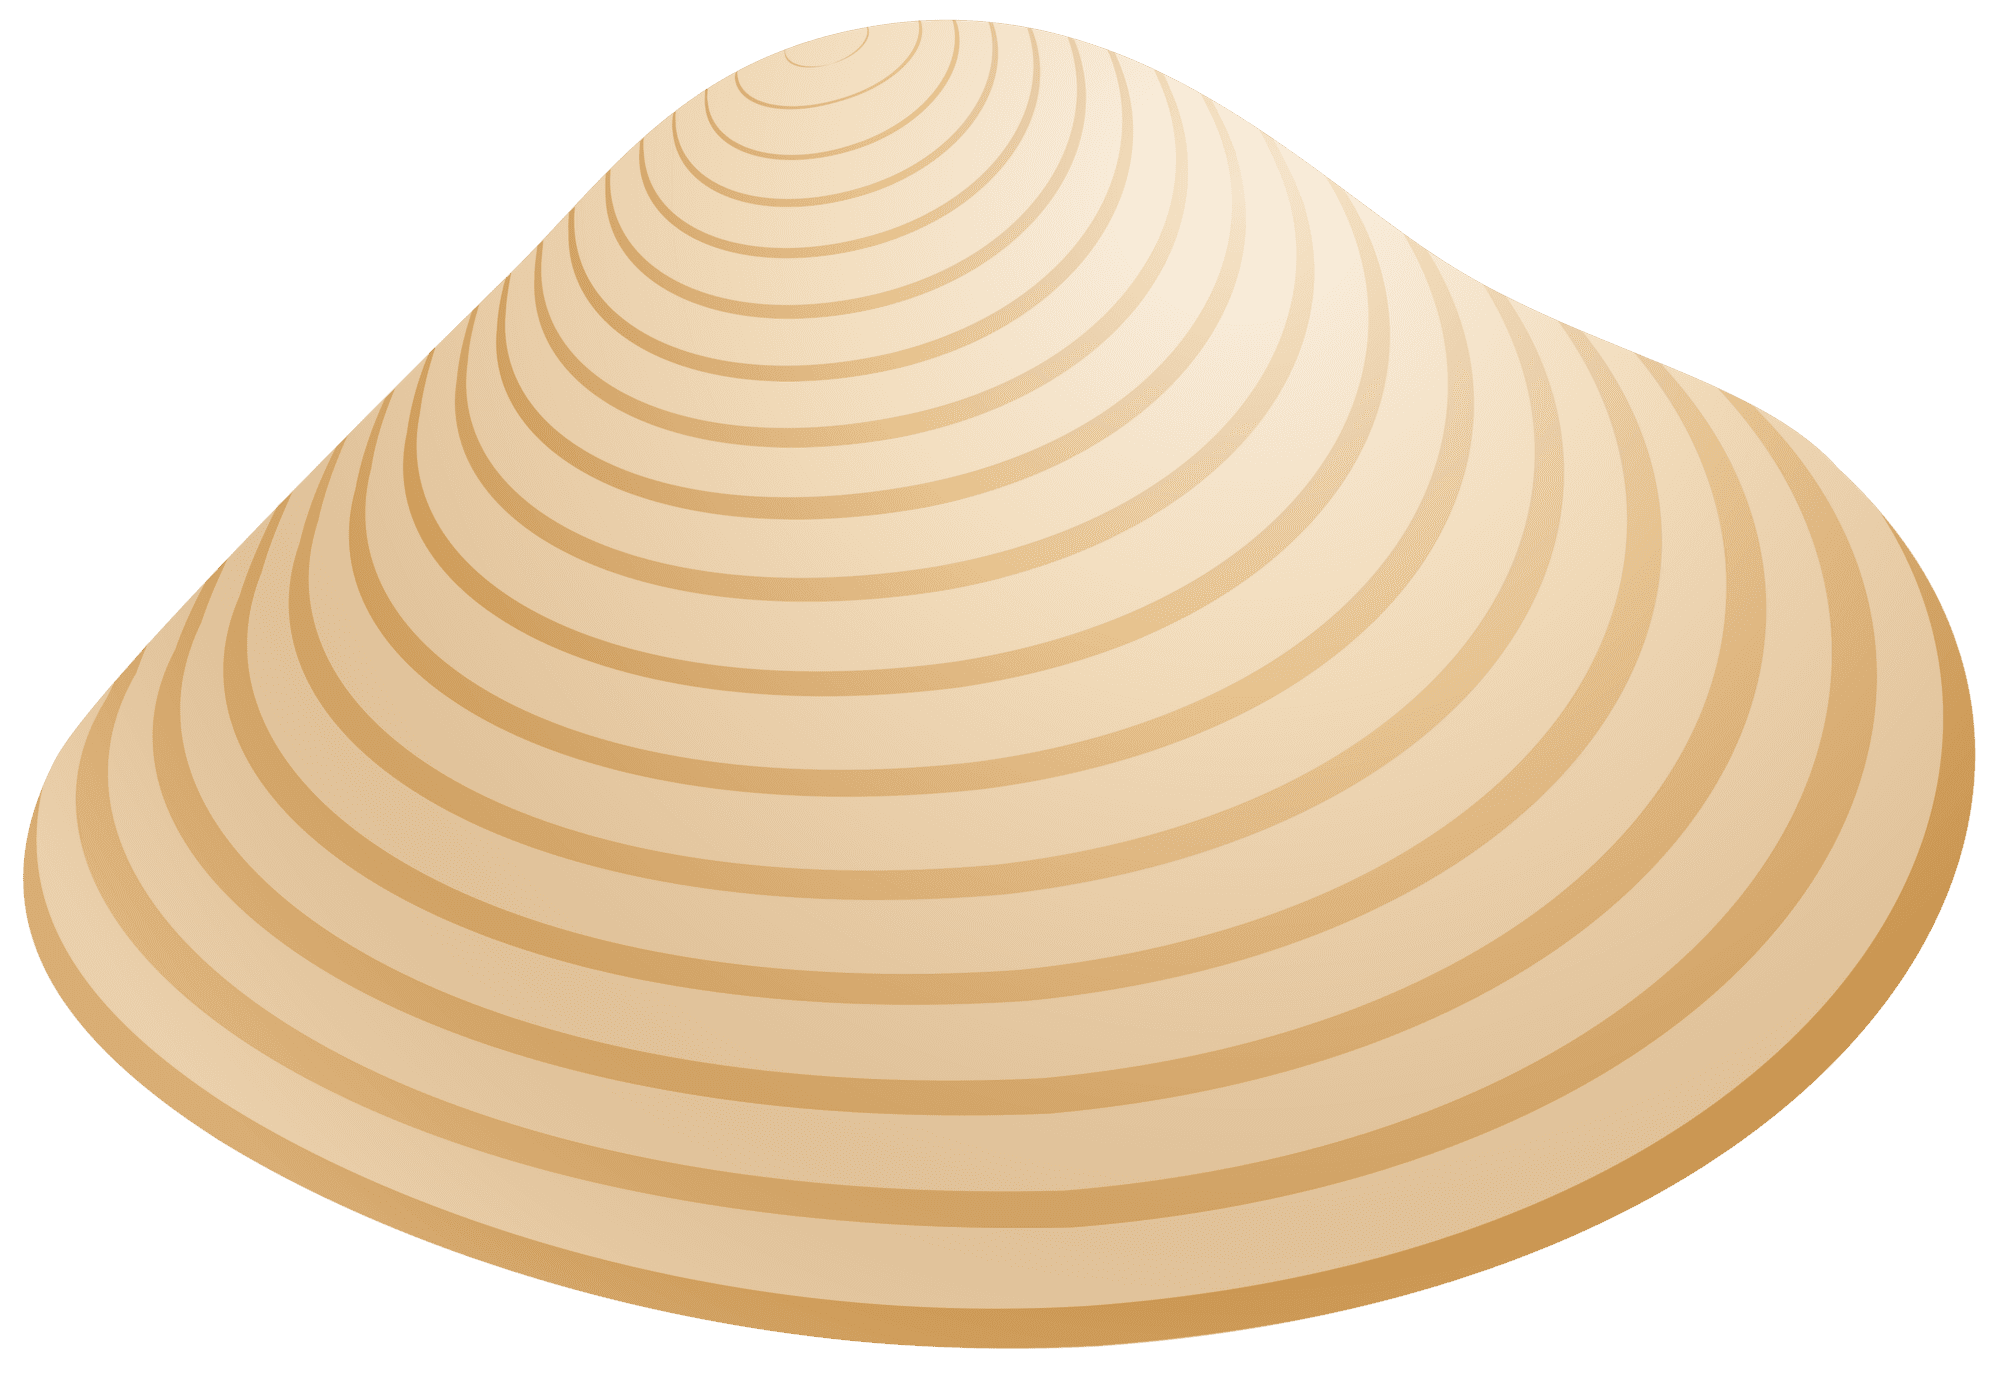 Sea shell clipart best image